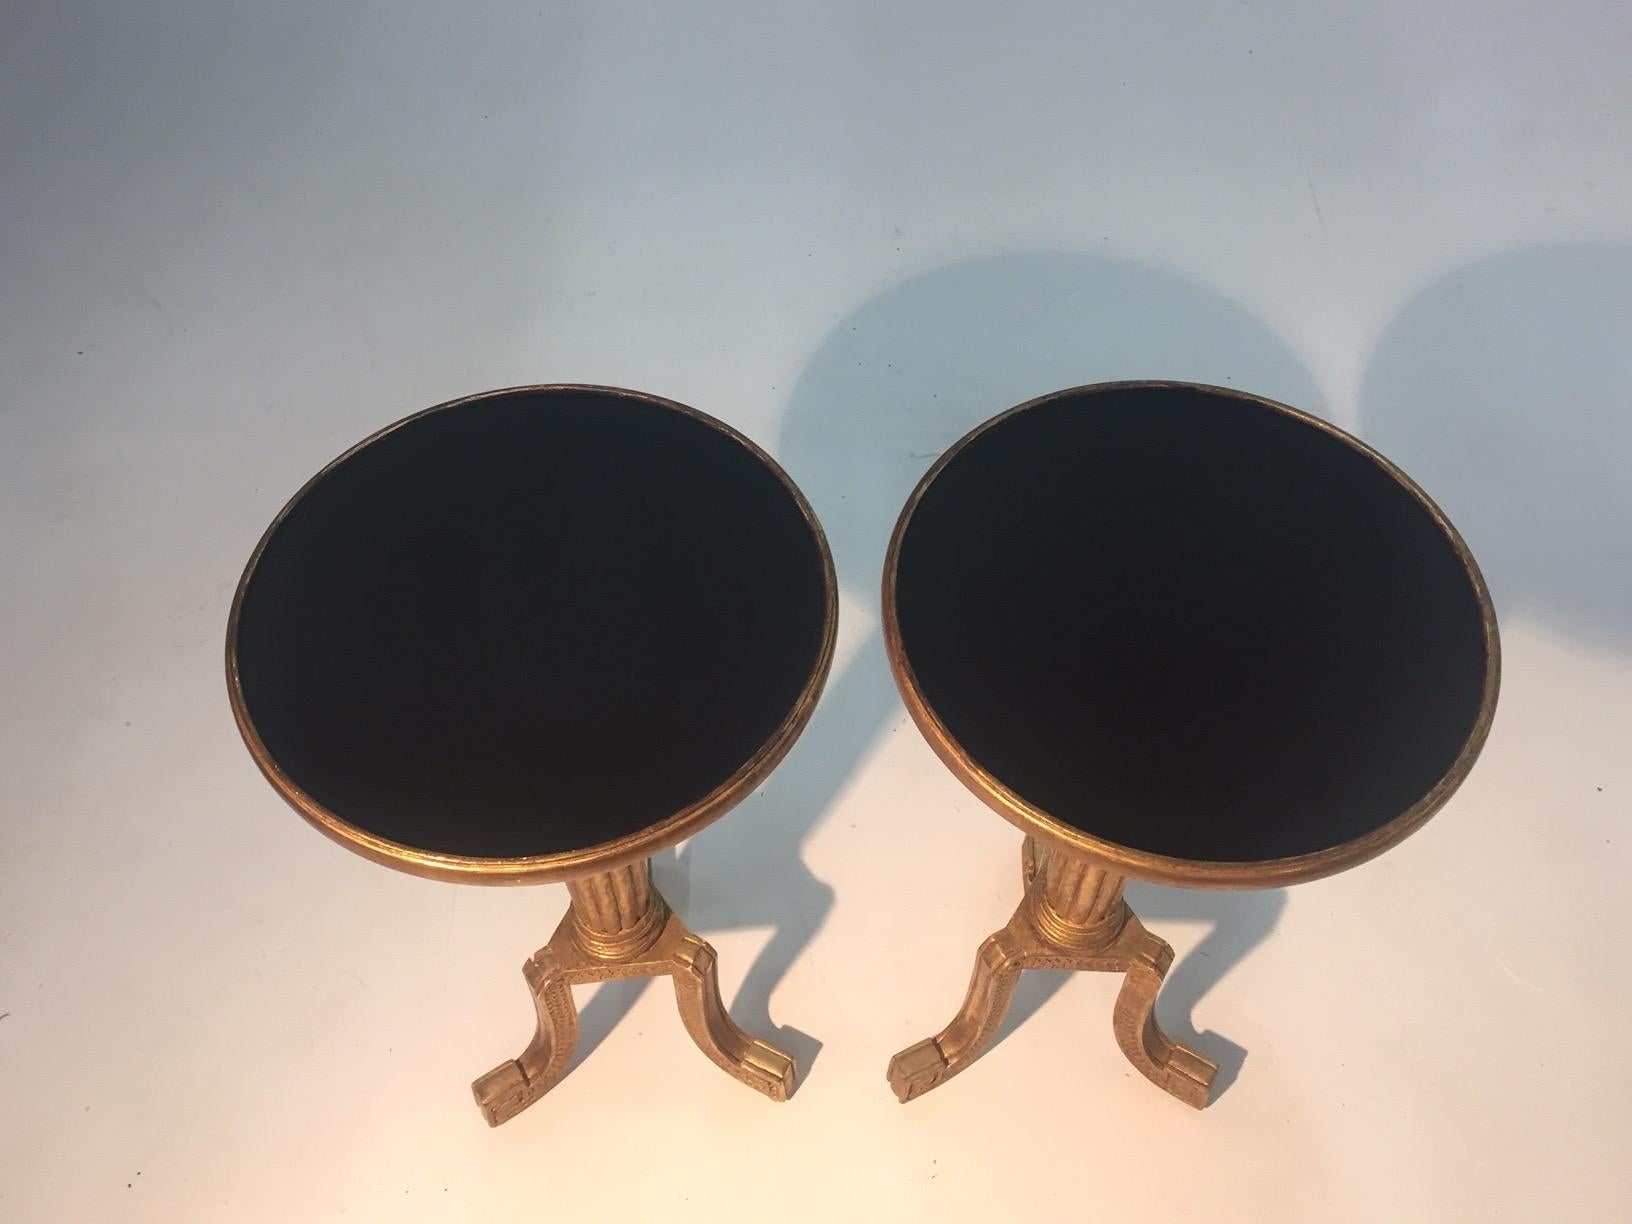 American Glamorous Pair of Round Neoclassical Giltwood End Tables